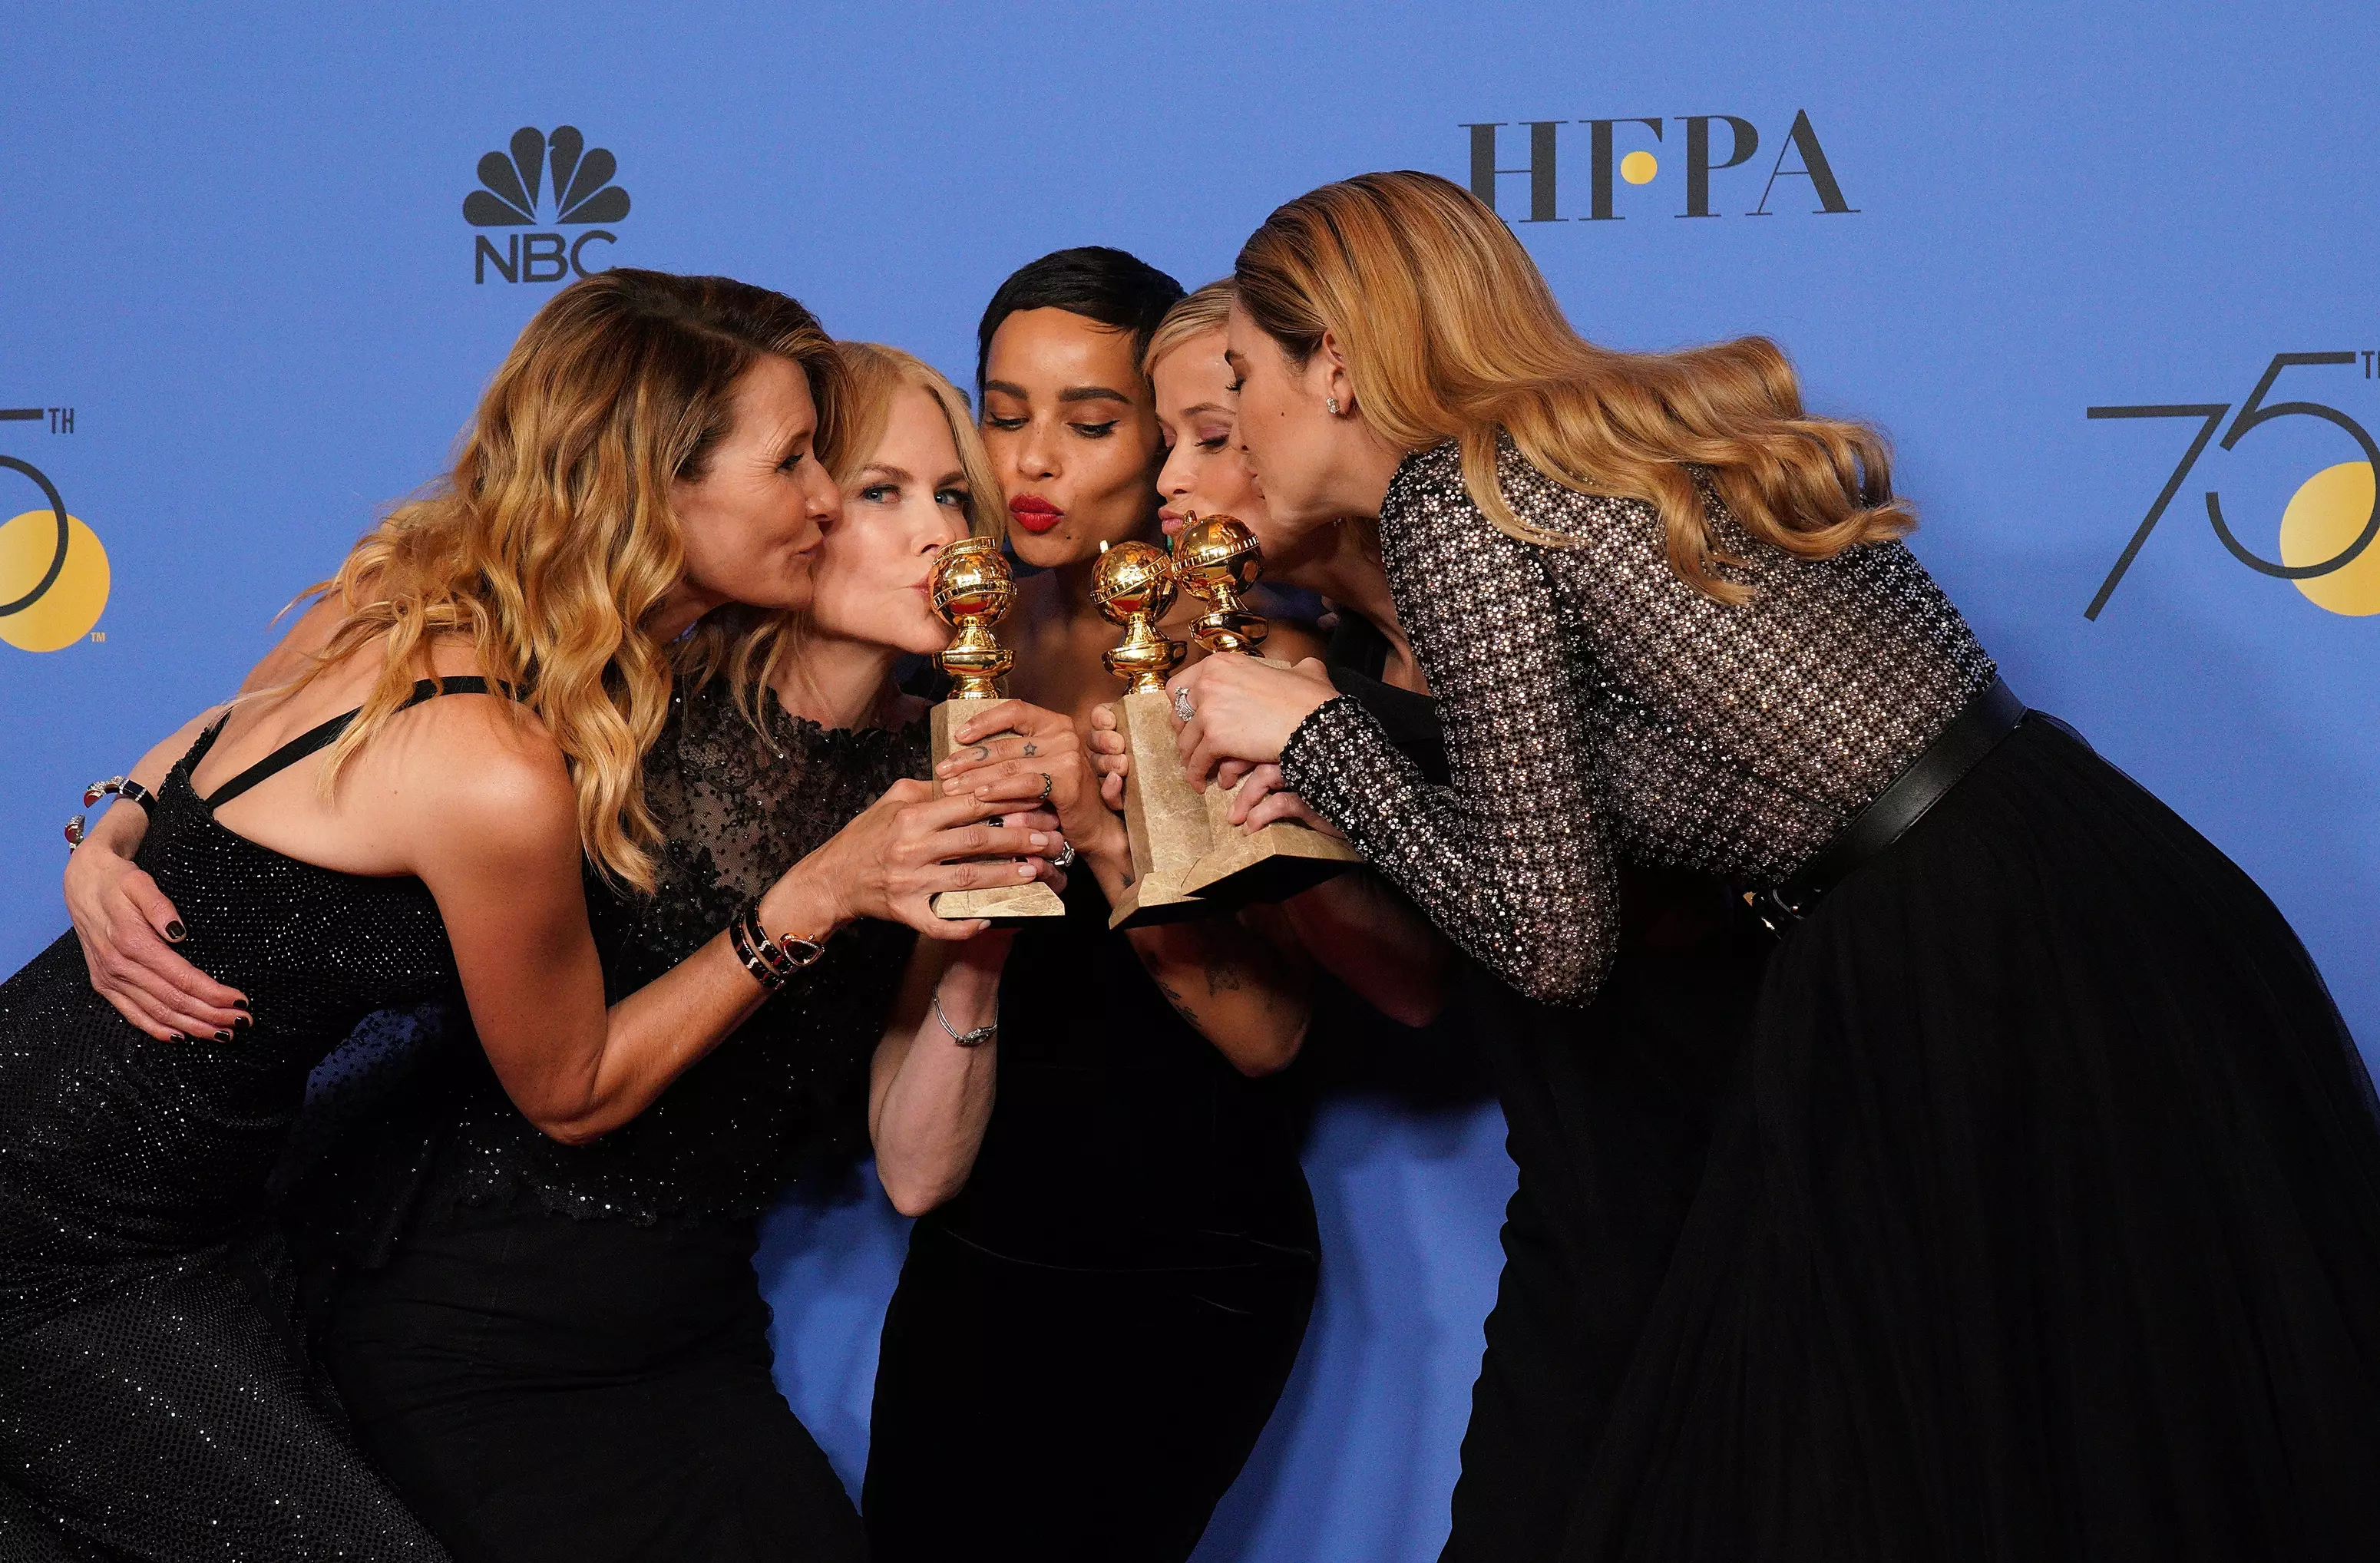 The cast of 'Big Little Lies' won fistfuls of awards for the first season of the HBO show.